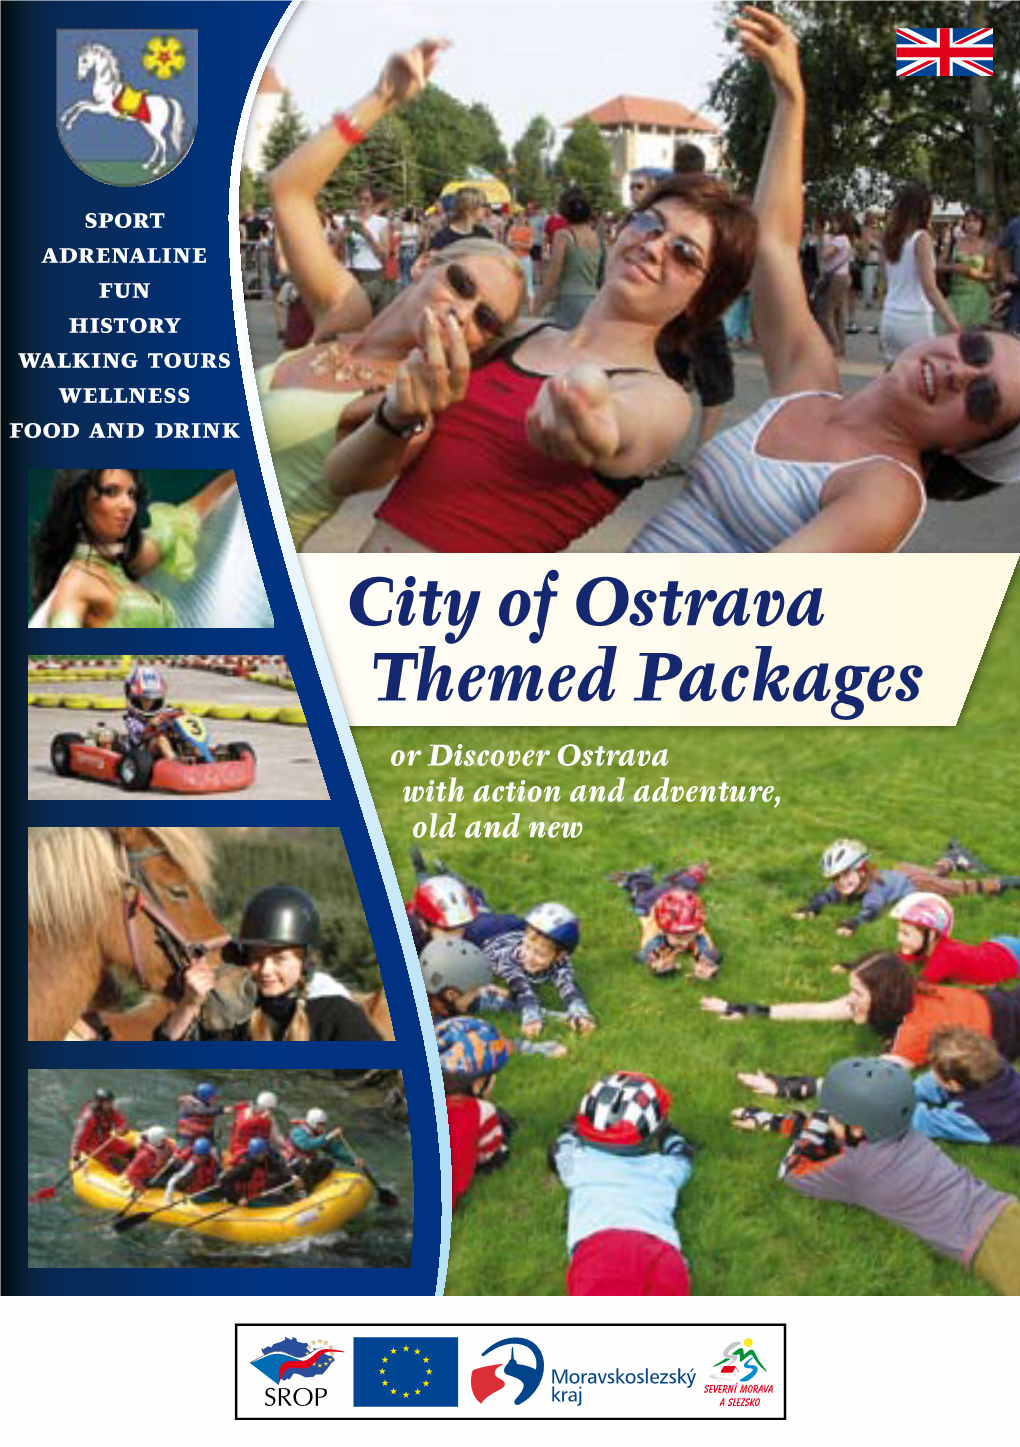 City of Ostrava Themed Packages Or Discover Ostrava with Action and Adventure, Old and New Introduction